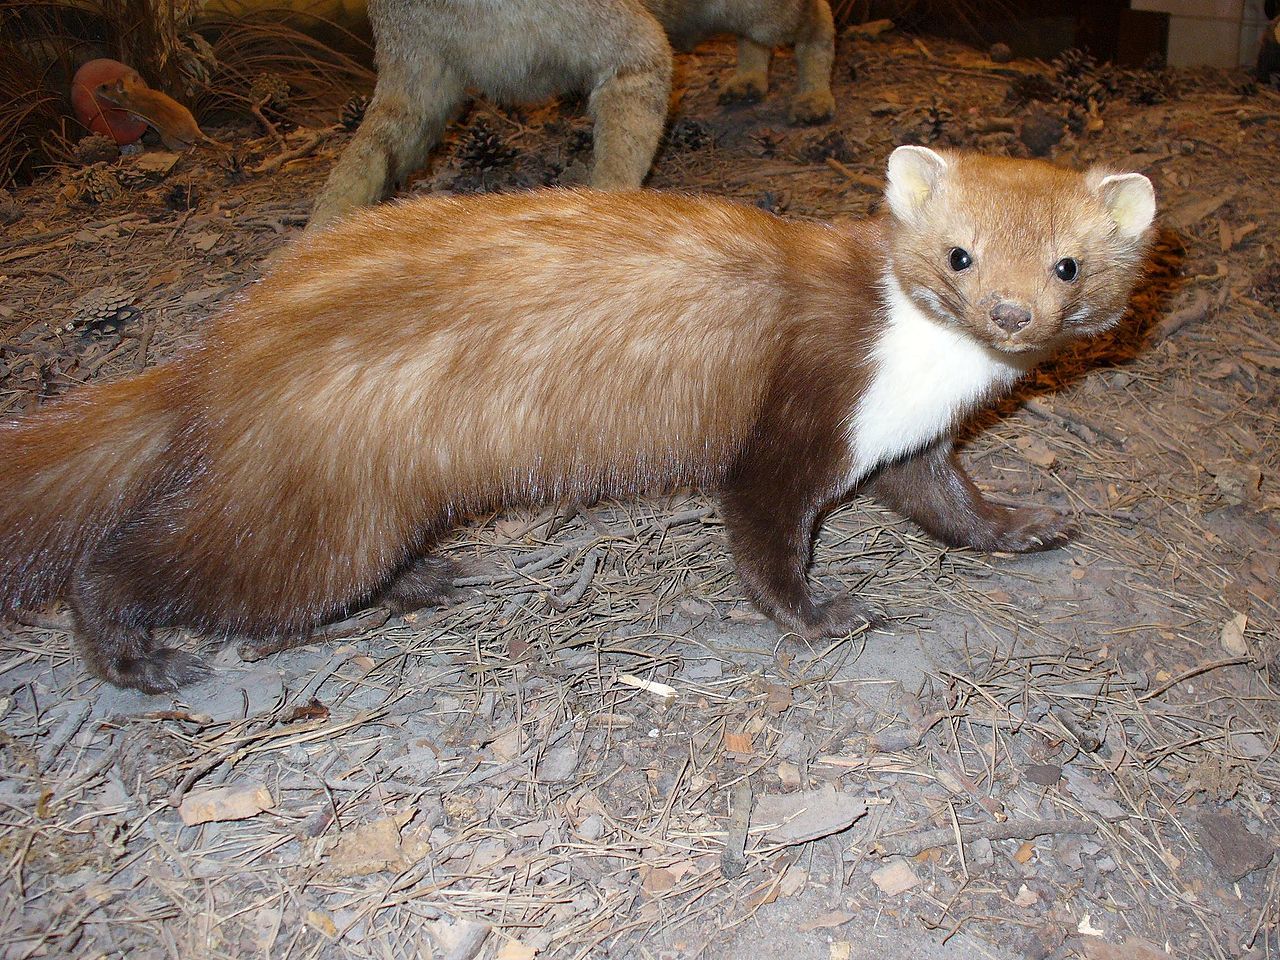 Large Hadron Collider Brought Down by Small Beech Marten